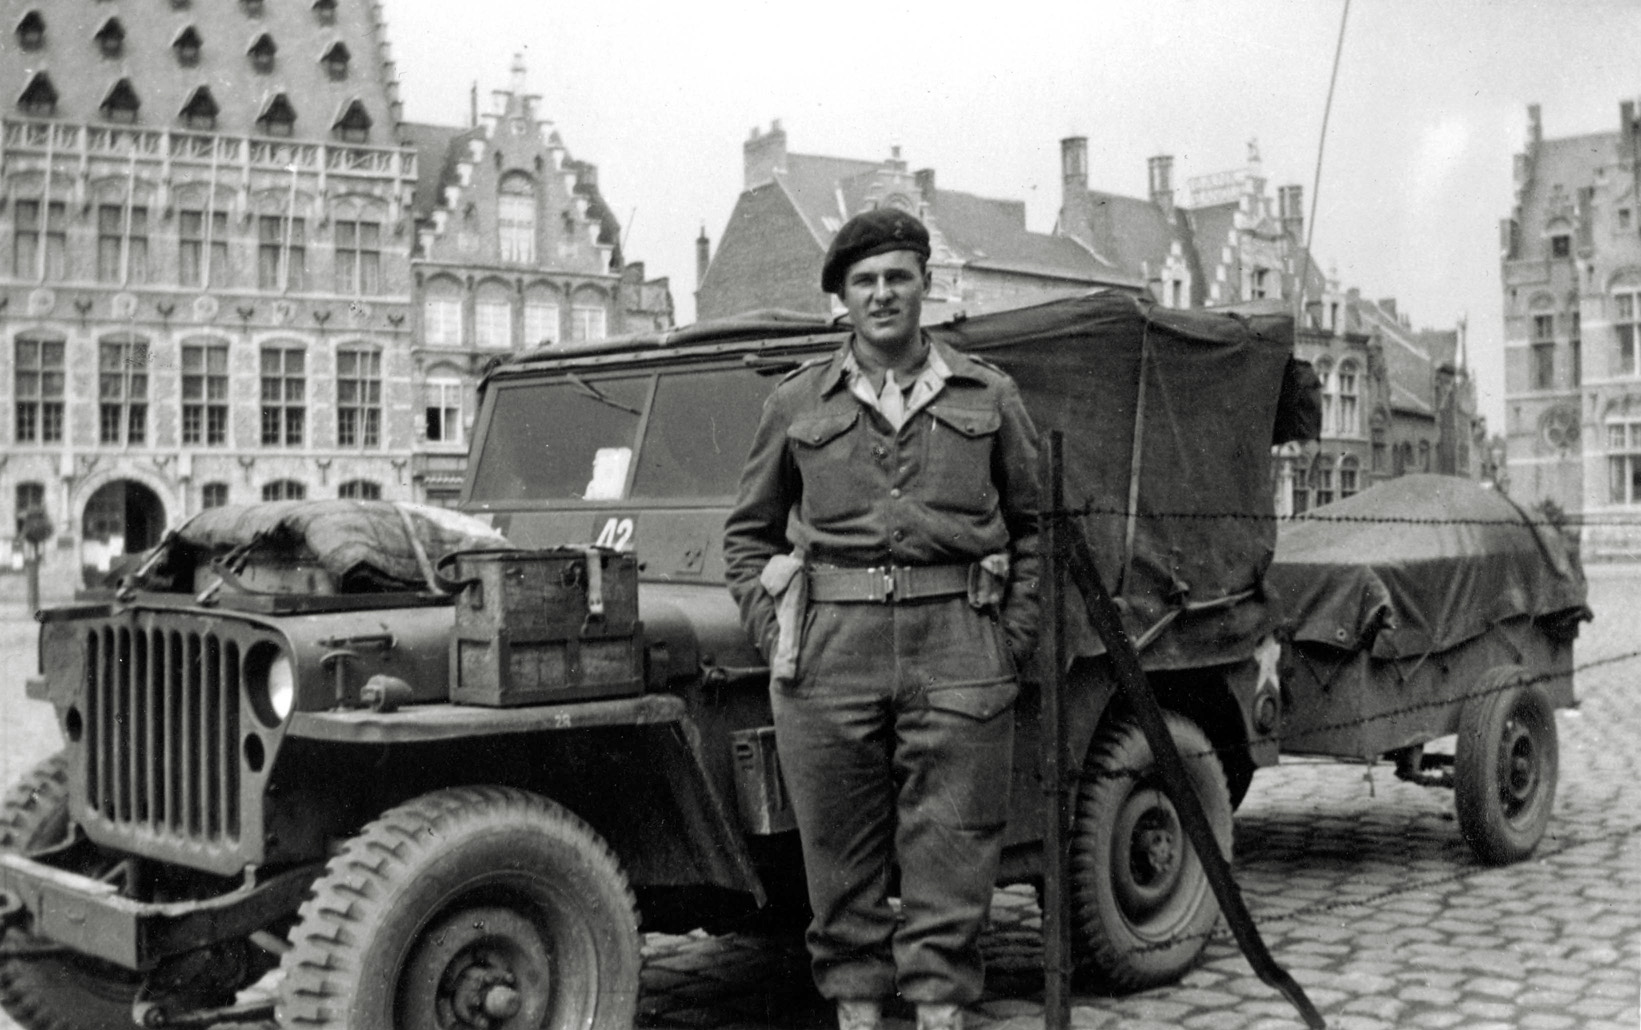 My father, Lt. A. D. Harper, was in the 6th Airborne Division. This is him in Ypres in May 1945 having just finished chasing the Germans to the Baltic! His vehicle is a US Jeep - their weapon was also US built - 75mm pack howitzers carried along with a Jeep in Horsa gliders. View full size.